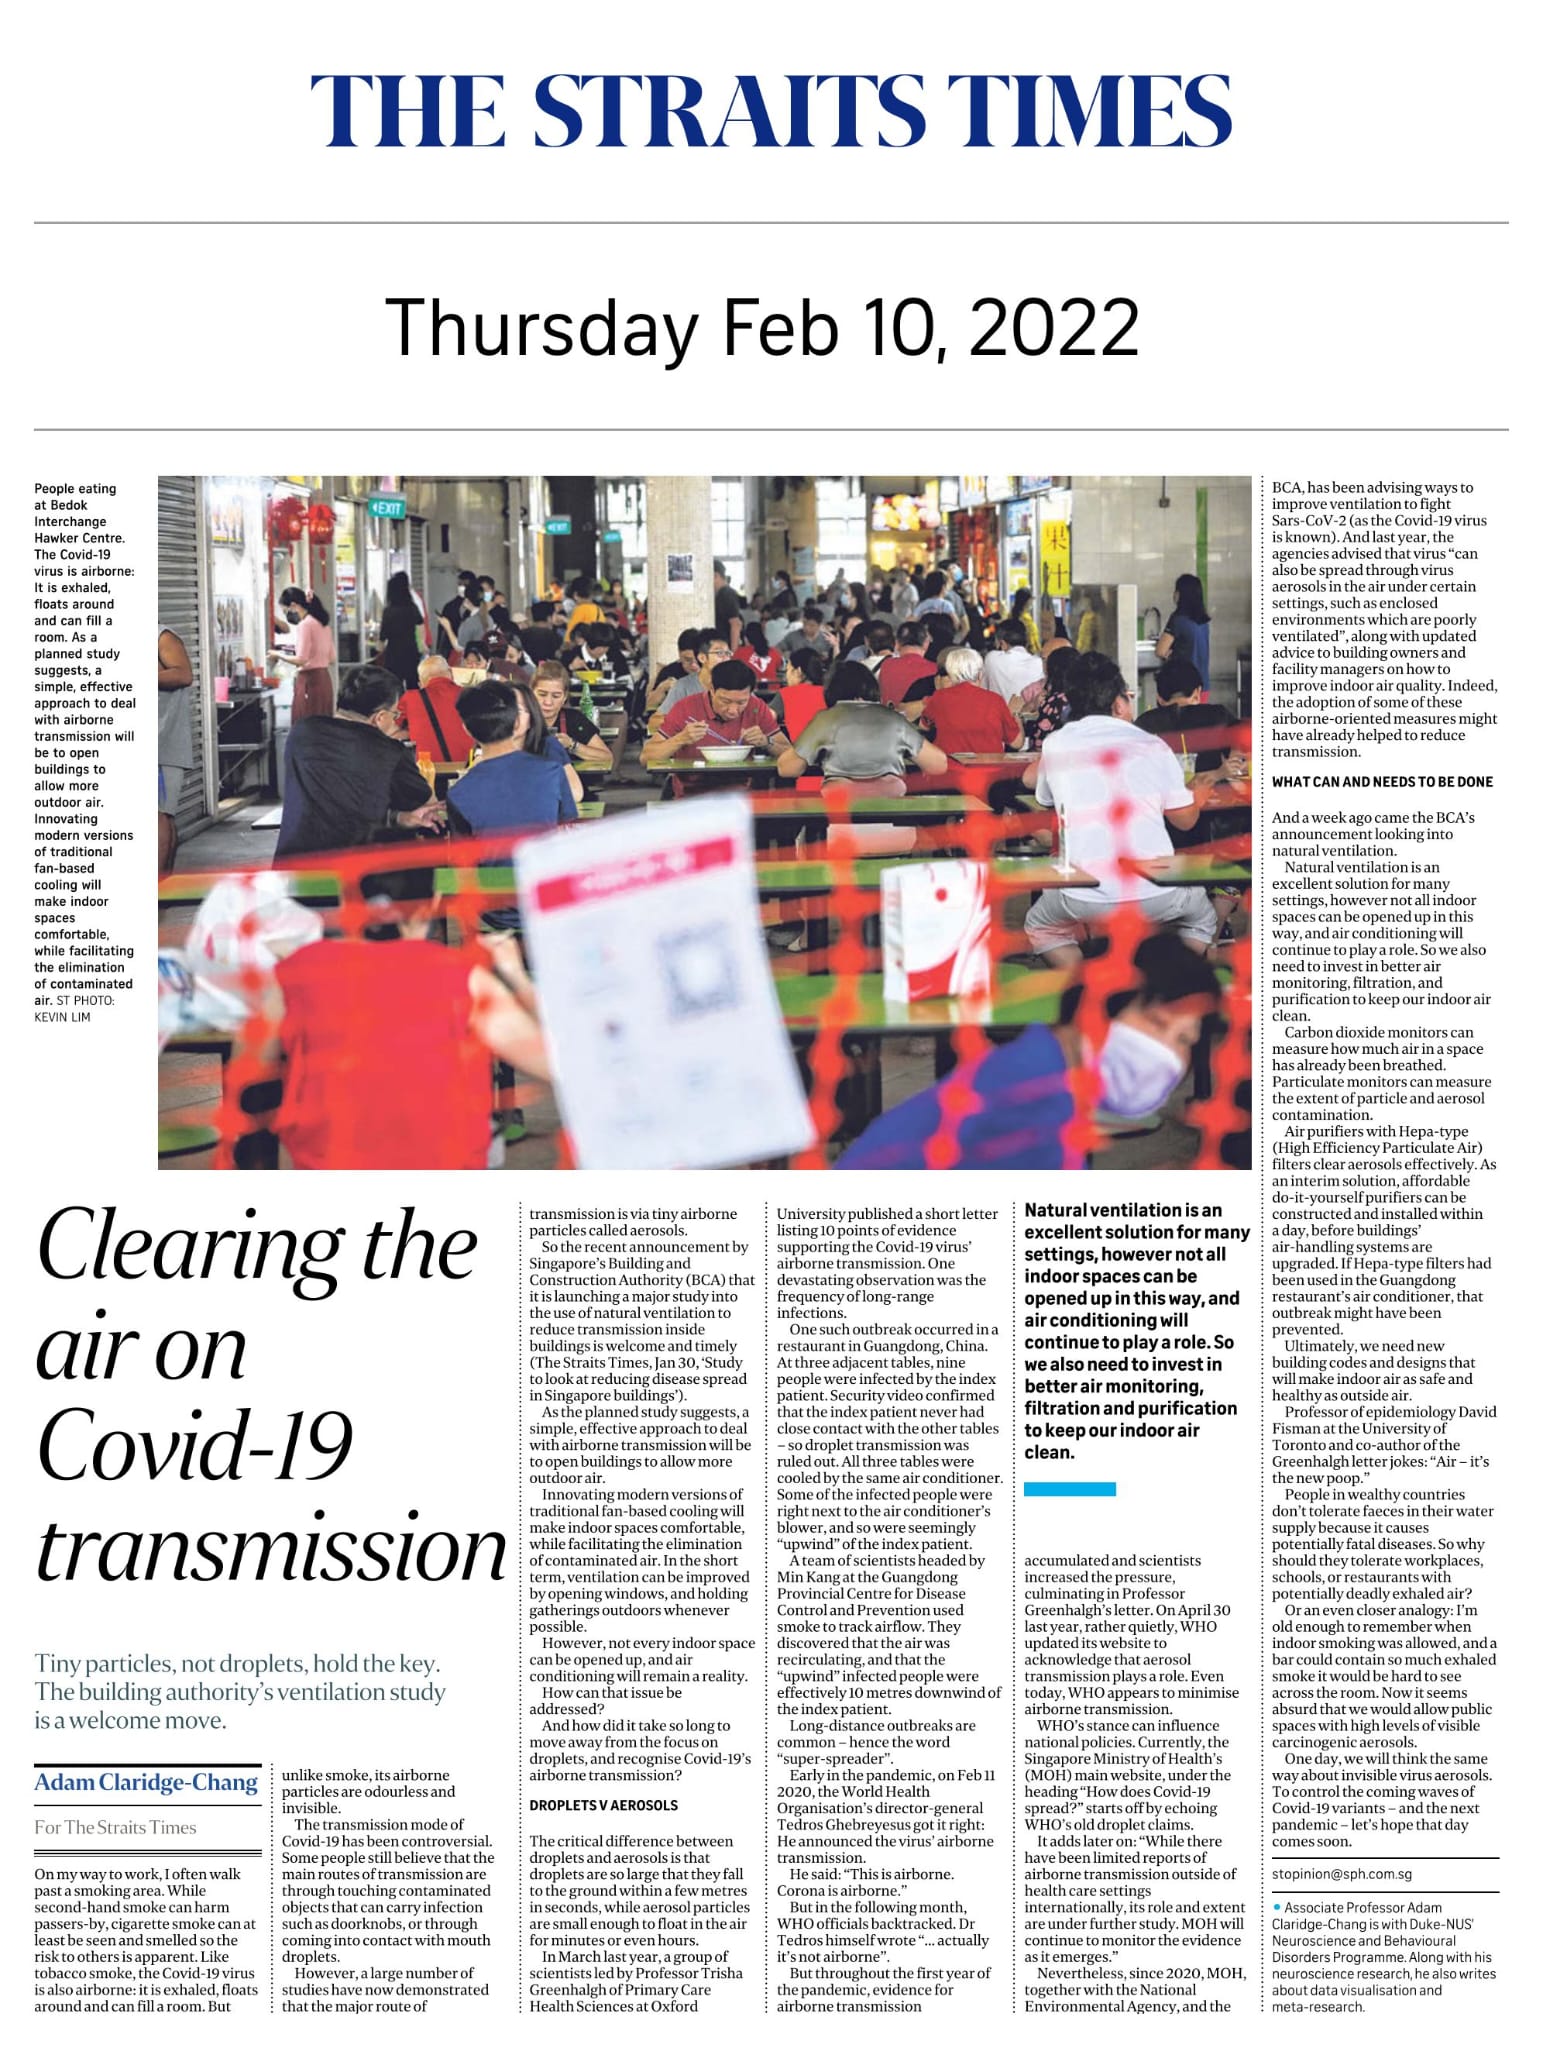 Clearing The Air on Covid-19 Transmission - Published in The Straits Times February 10, 2022